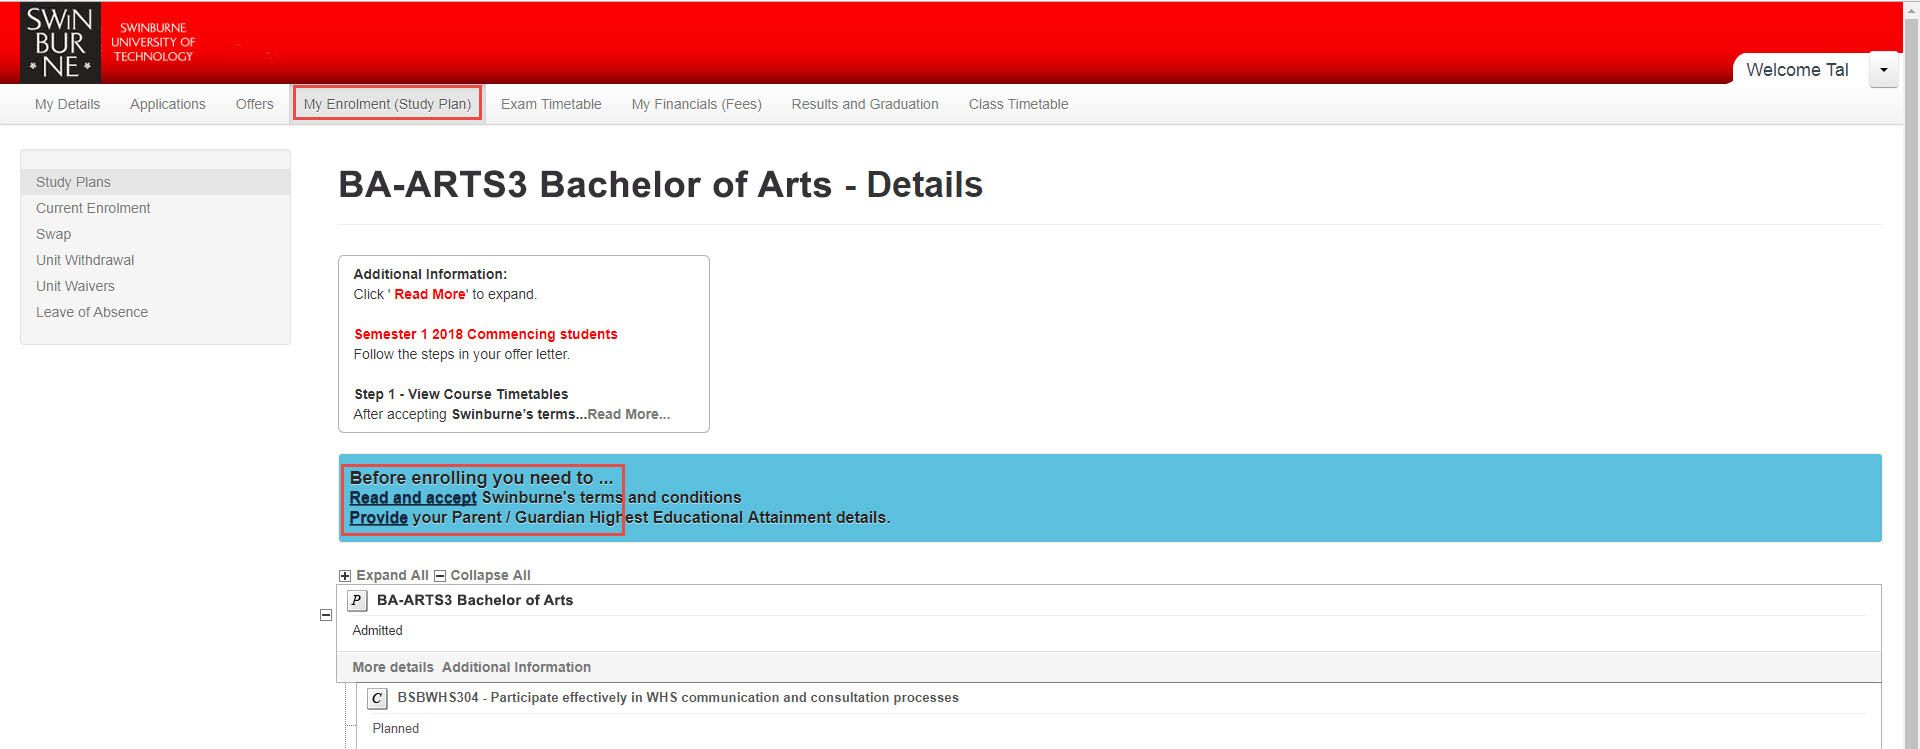 Screenshot of the ‘My Enrolment (Study Plan)’ webpage indicating that you must read and accept Swinburne’s terms and conditions and provide HECS details by clicking the text links highlighted in blue.